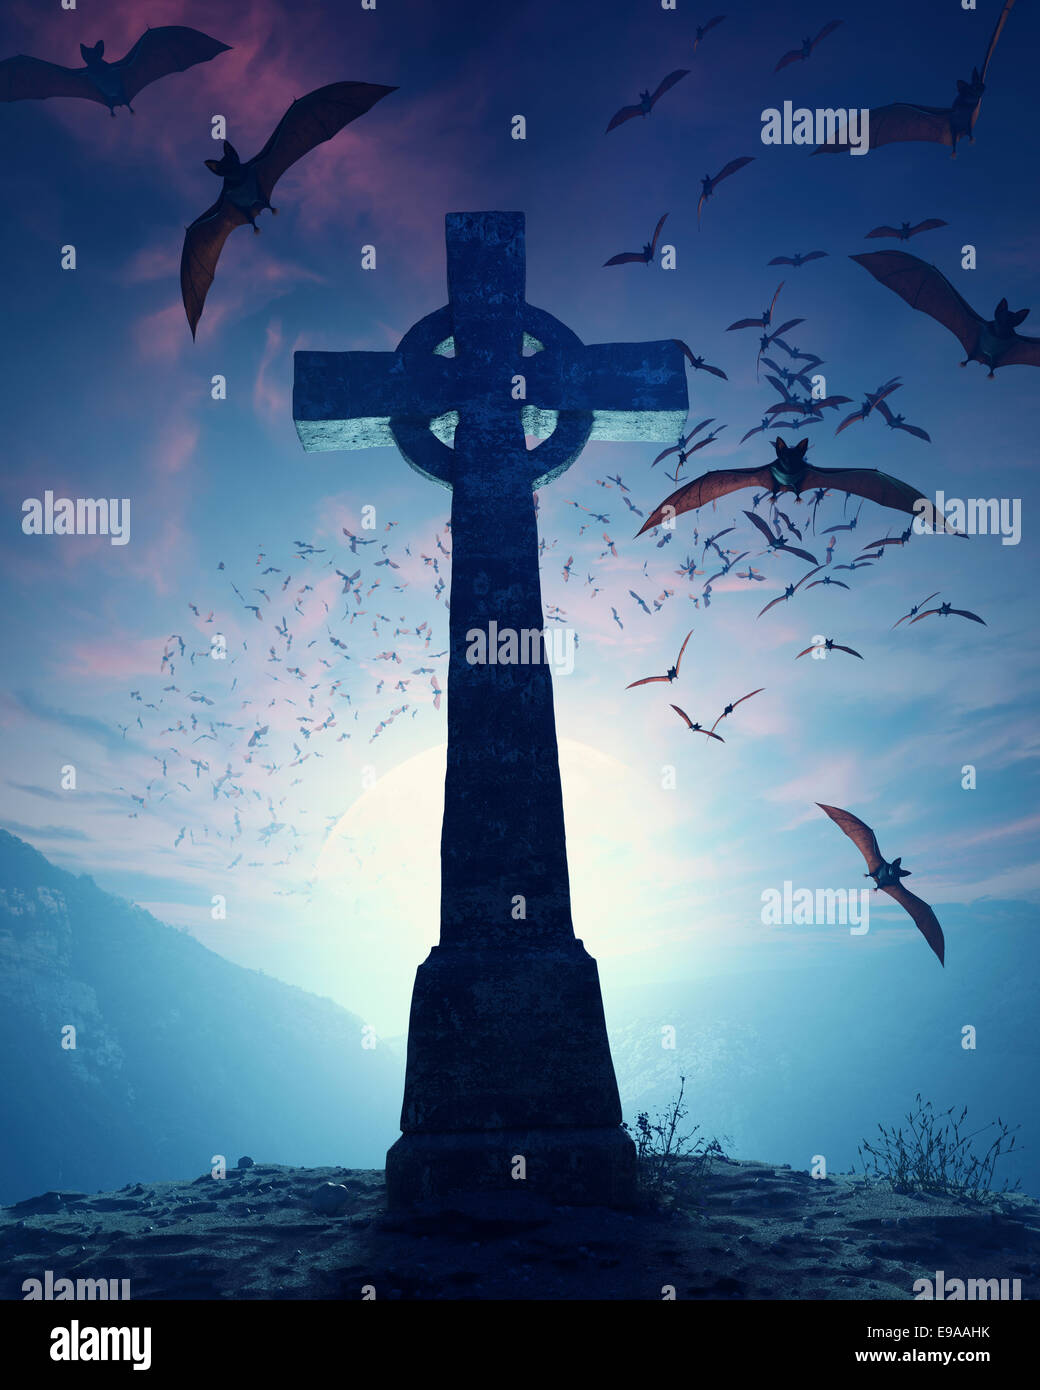 Celtic Cross with swarm of bats invading against misty moon Stock Photo